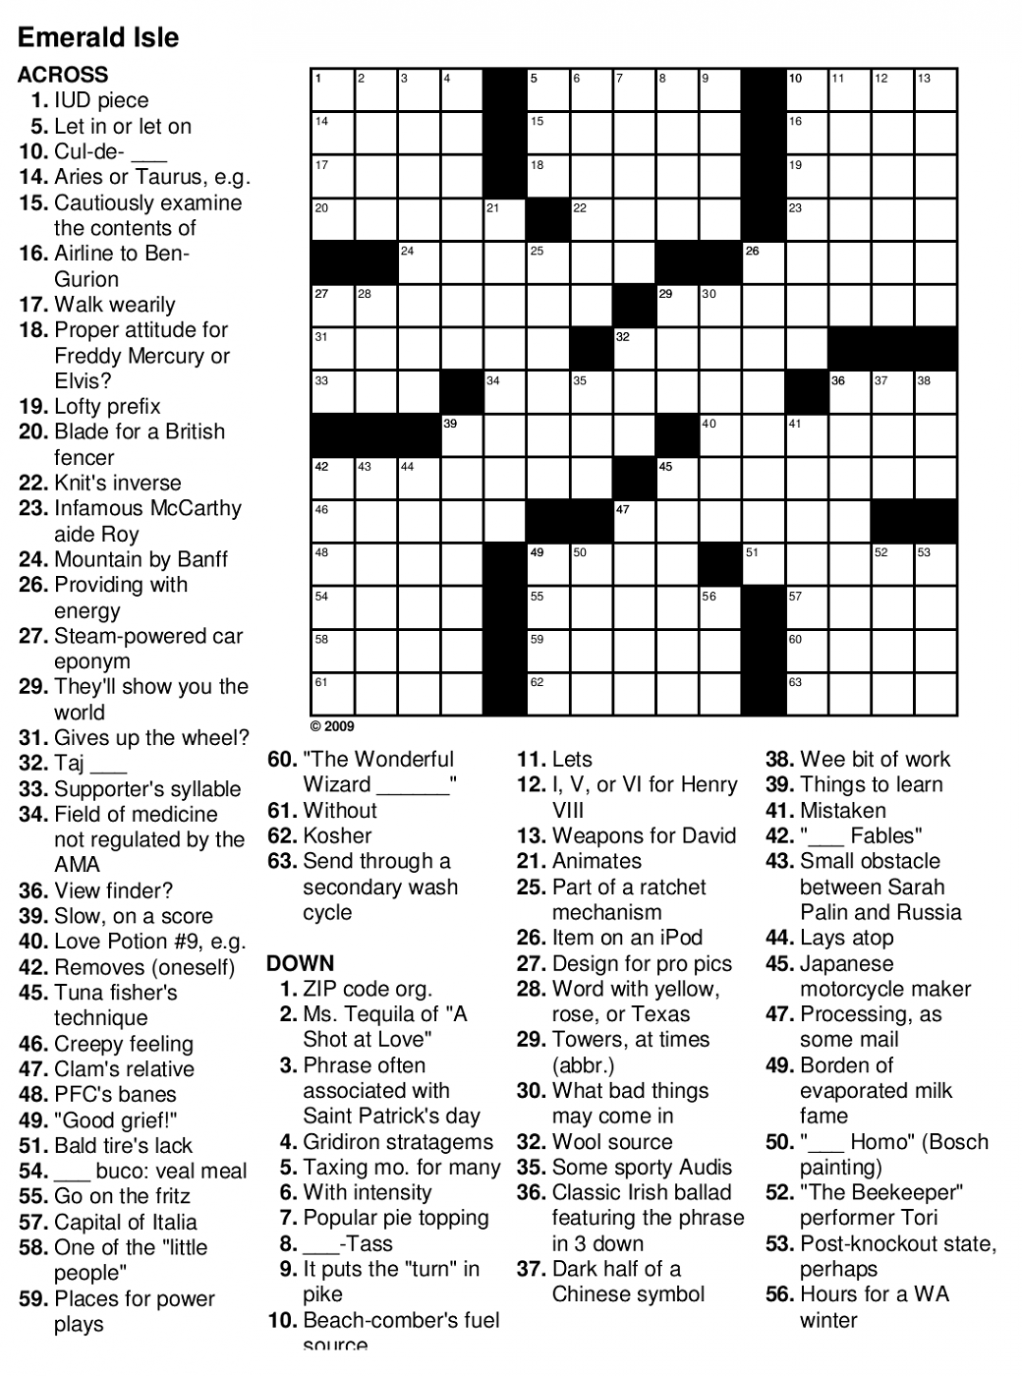 Crossword Puzzle Of Famous Authors And Their Books Free Printable